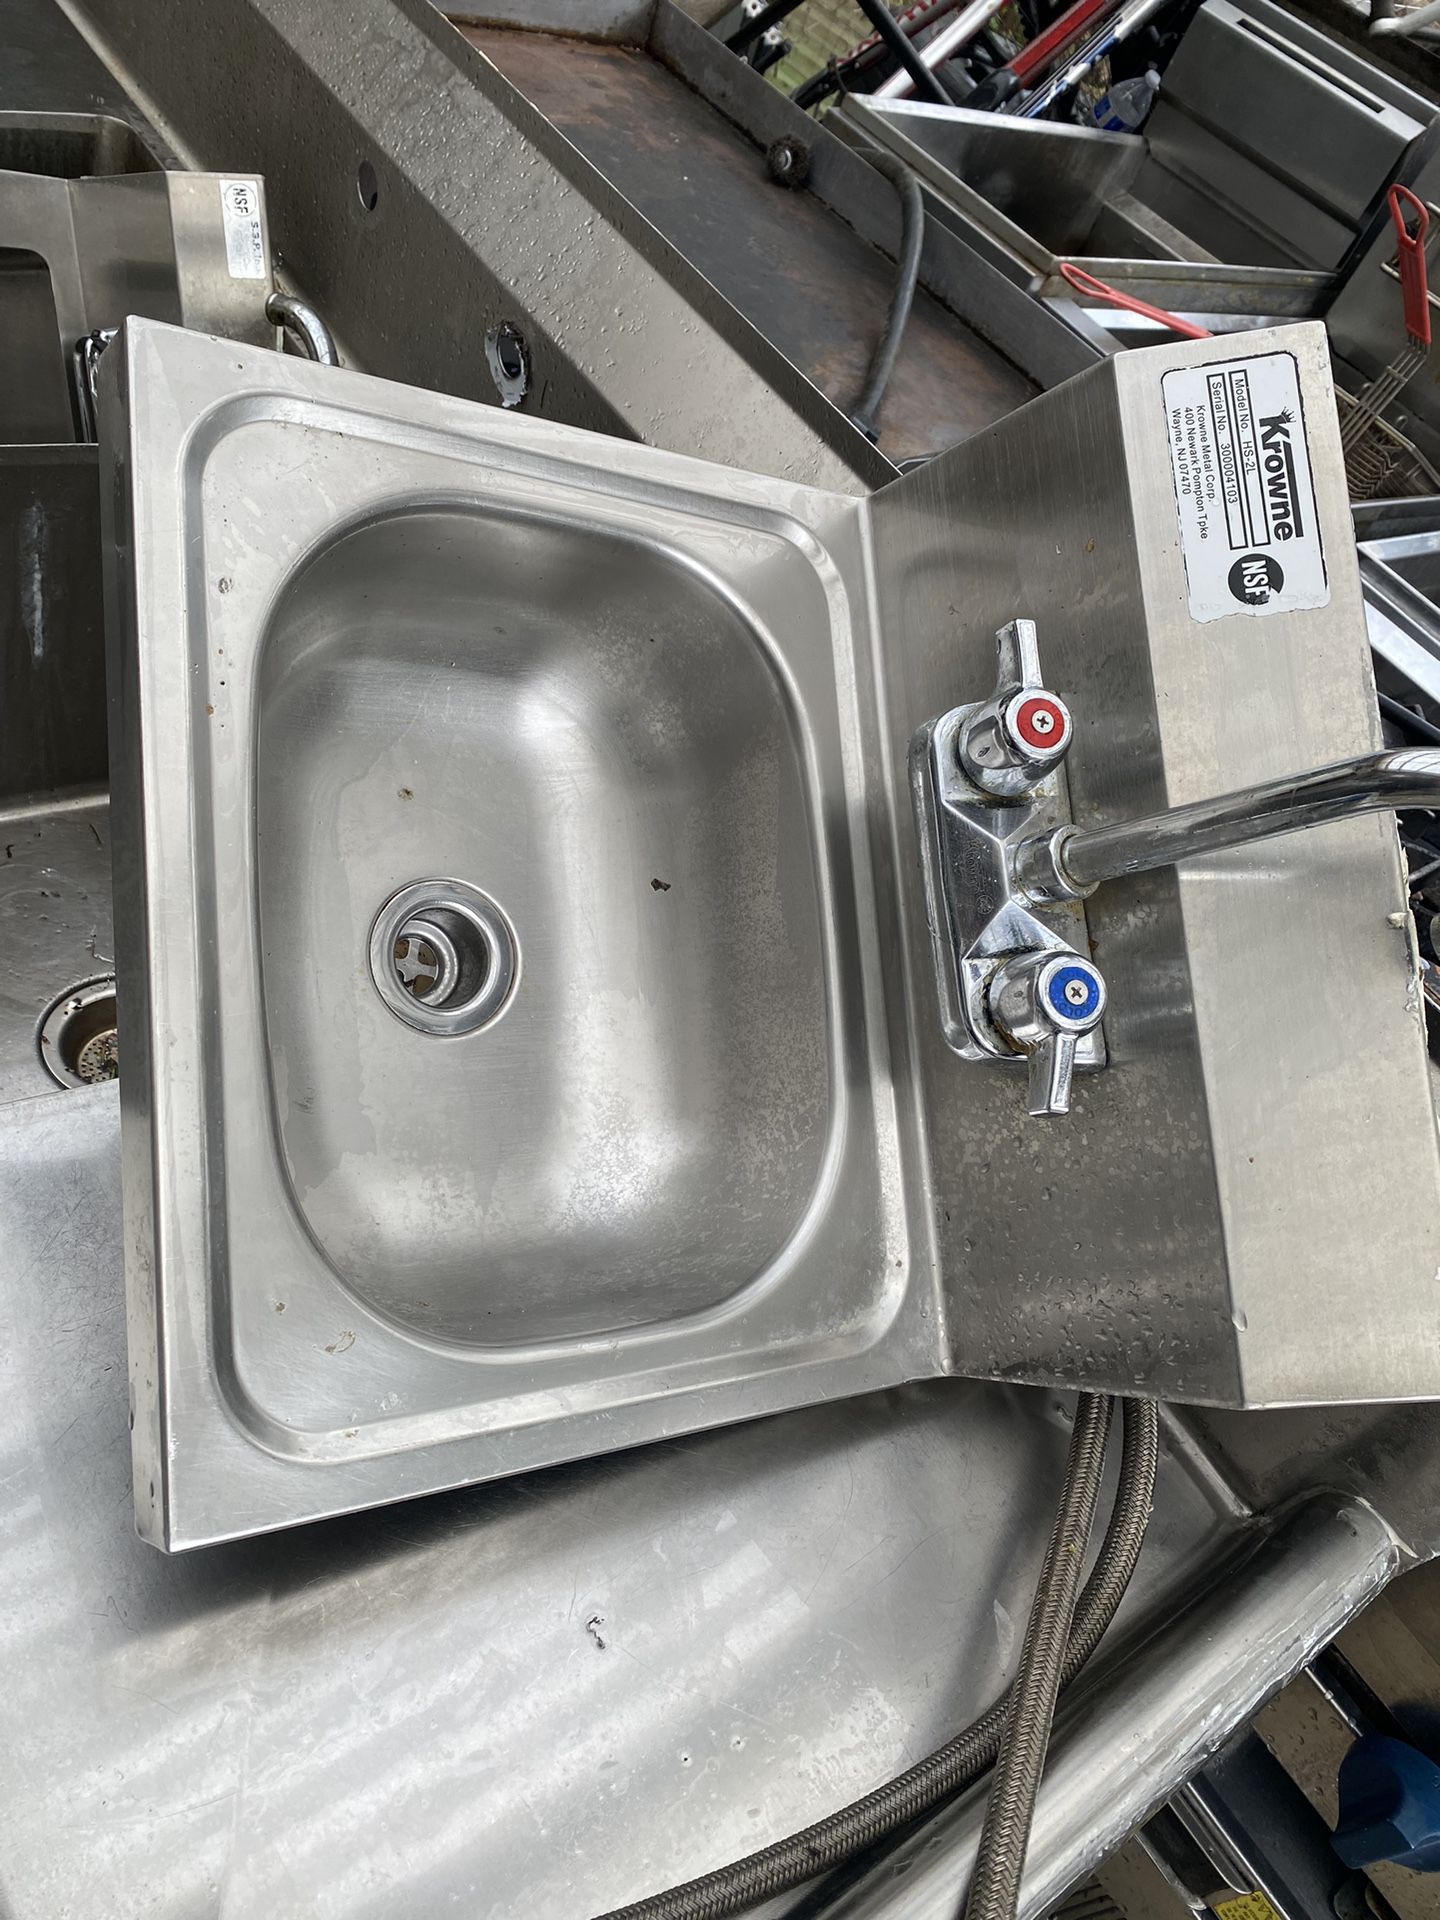 Small Hand Sink For Food Truck Or Coffe Stand